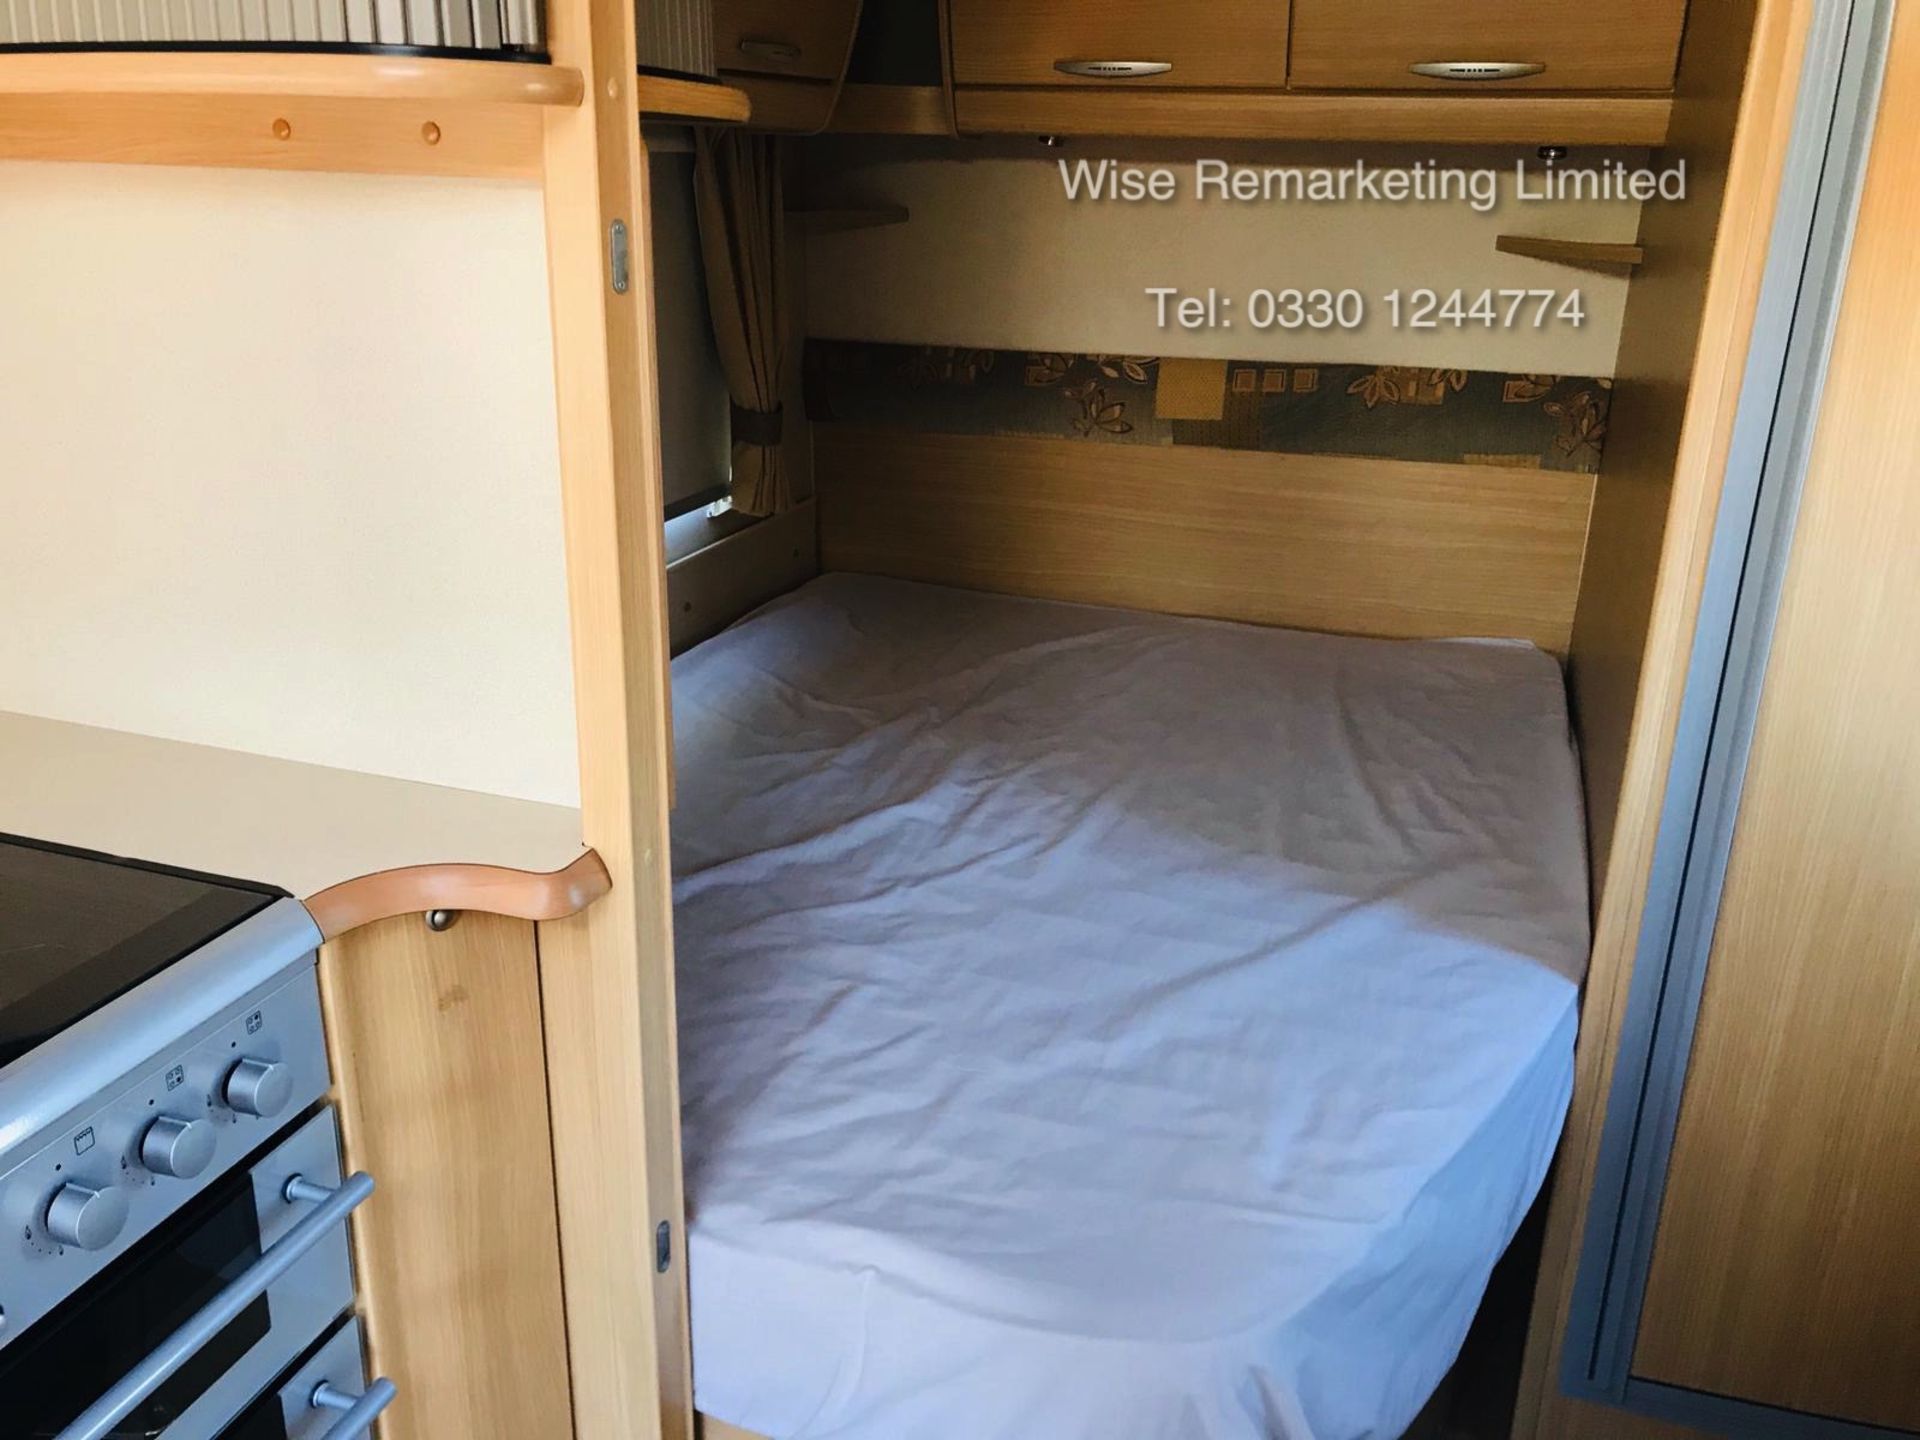 (RESERVE MET) Swift Abbey Freestyle 480 (4 Berth) Caravan - 2008 Model - 1 Former Keeper From New - Image 18 of 32